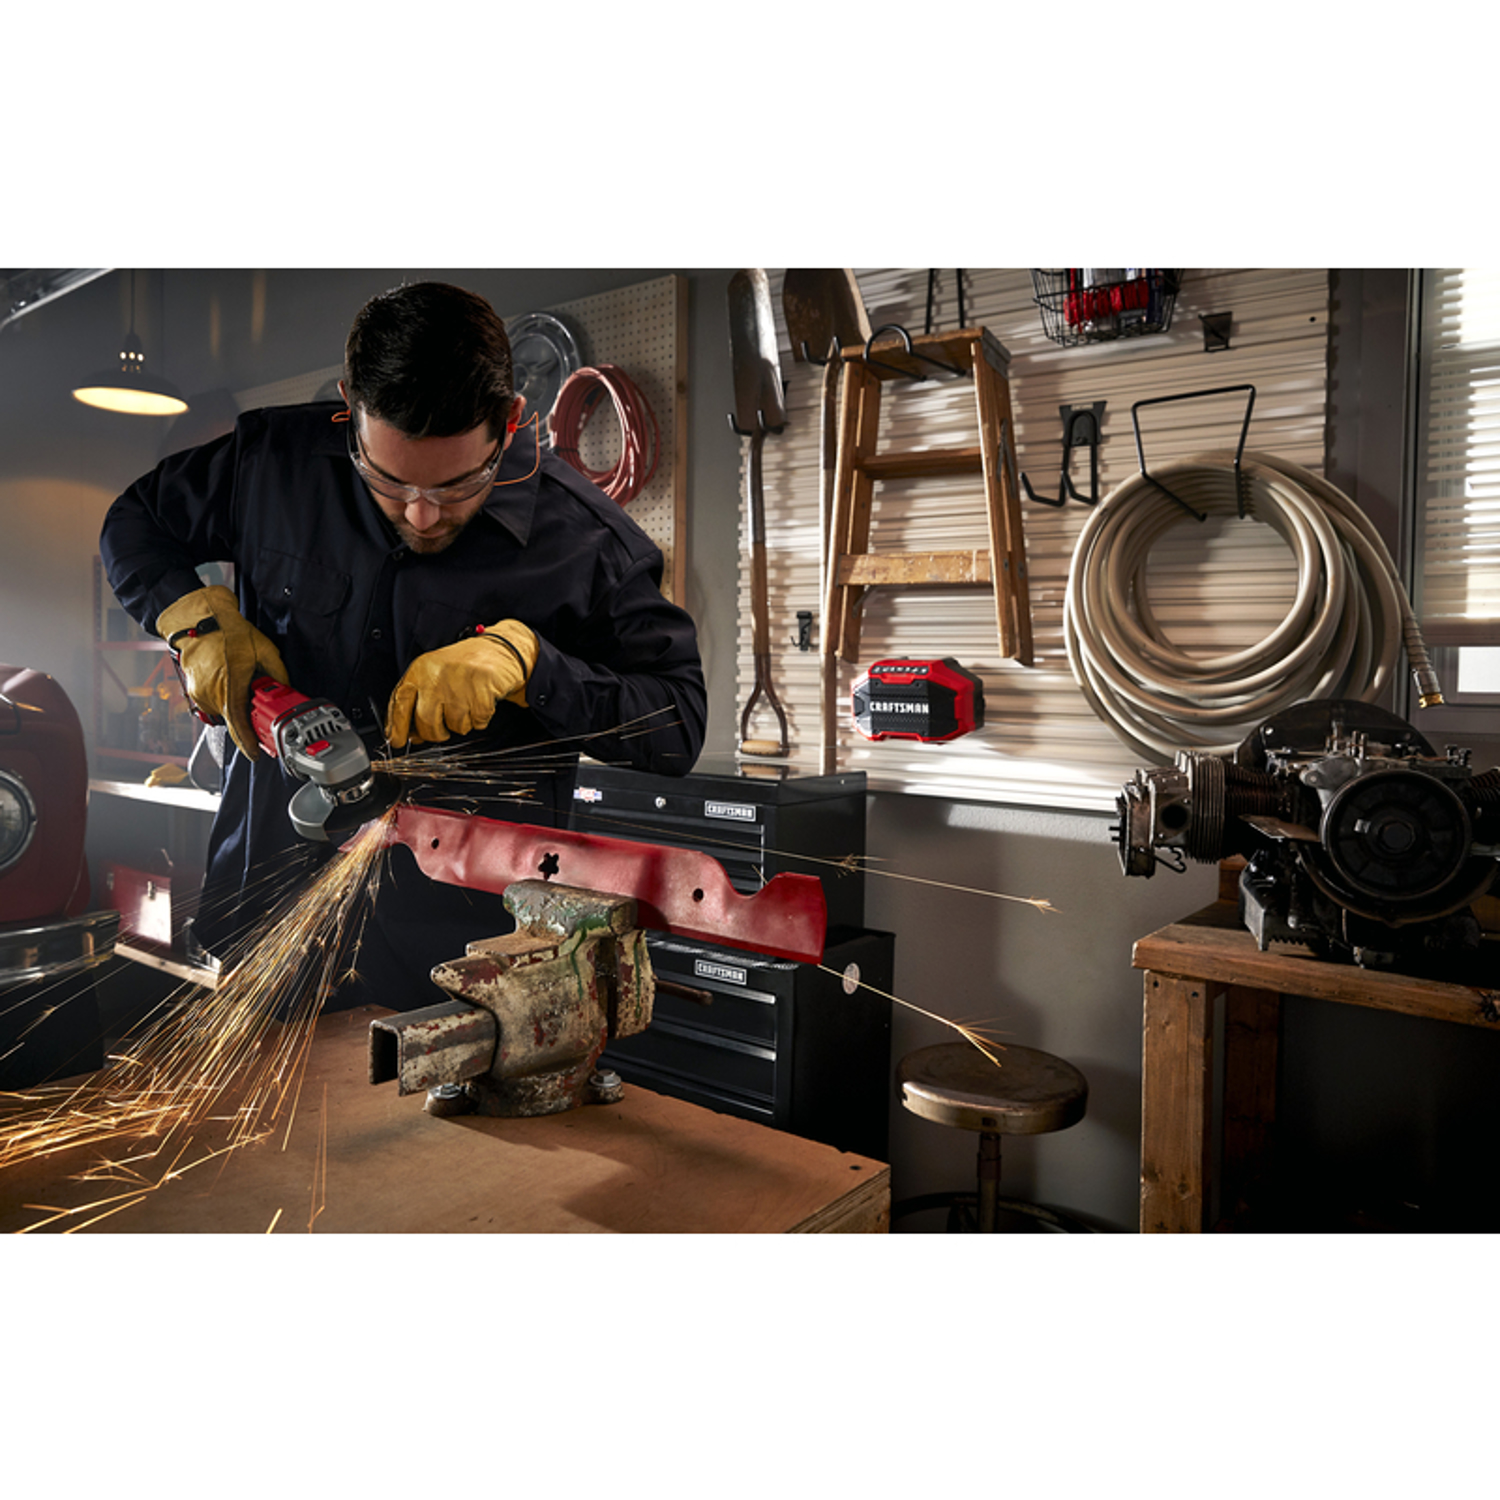 V20* Cordless 4-1/2-in Small Angle Grinder (Tool Only)